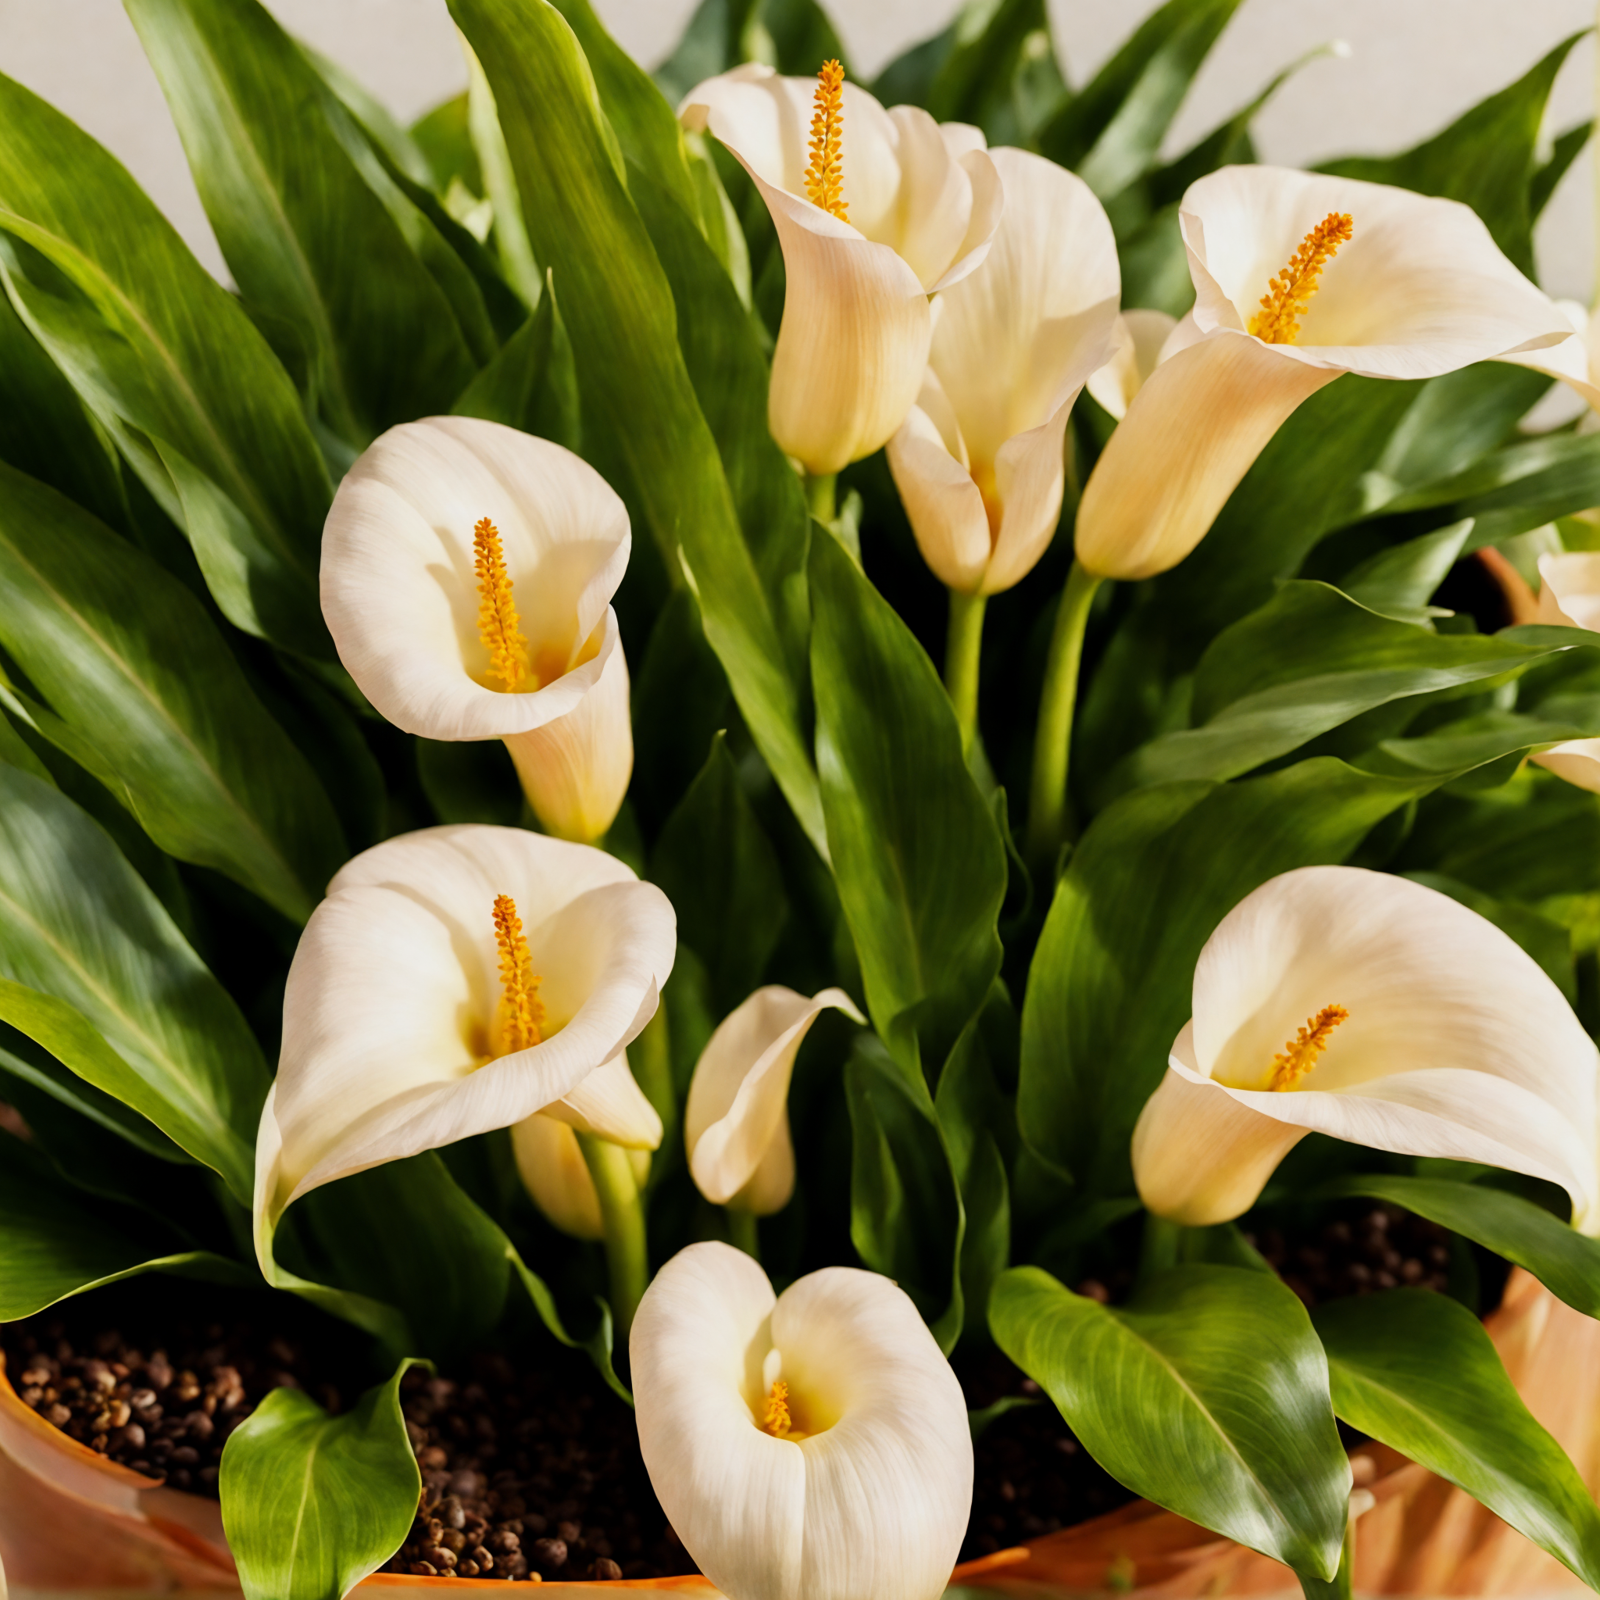 A cluster of Zantedeschia aethiopica, with white spathes and yellow spadices, in an indoor planter.